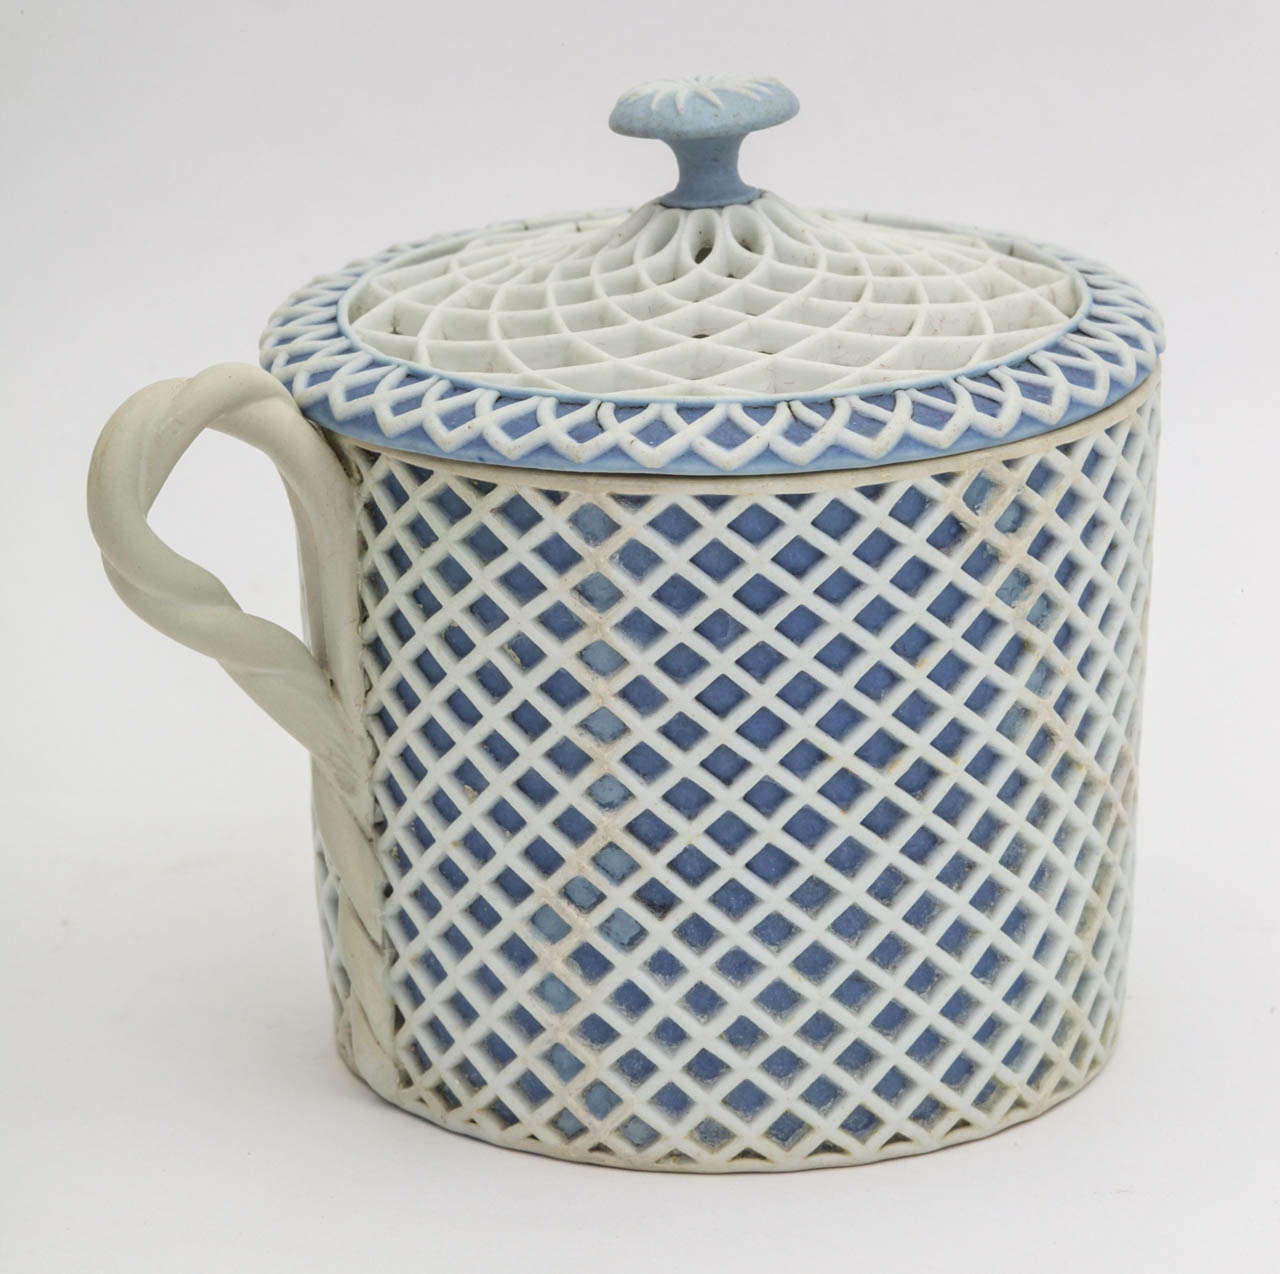 A fine signed Wedgwood blue and white jasper covered custard cup with pierced cover and rope twist handle, upper case mark